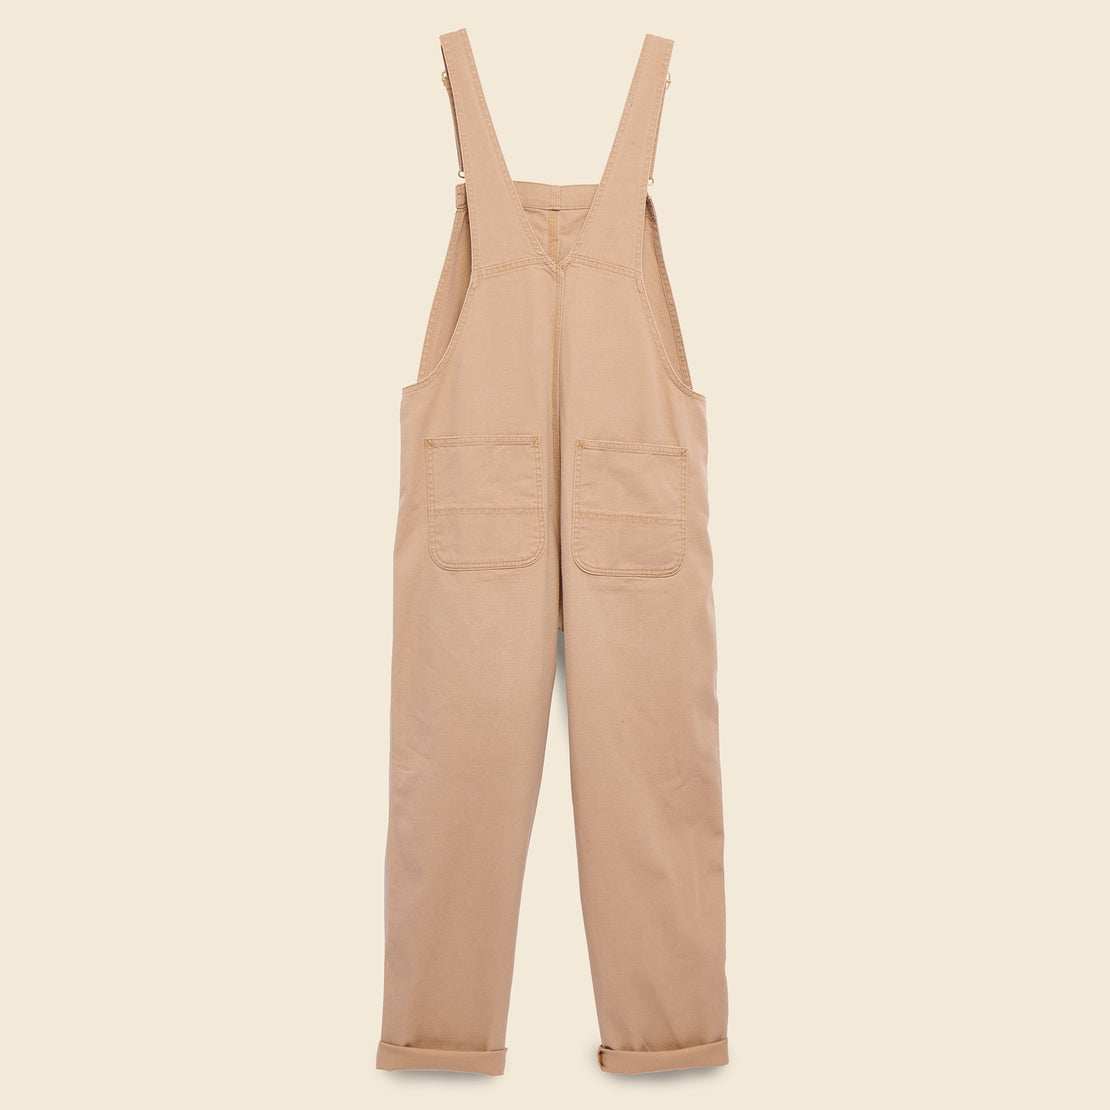 Bib Overall - Dusty Brown - Carhartt WIP - STAG Provisions - W - Onepiece - Overalls